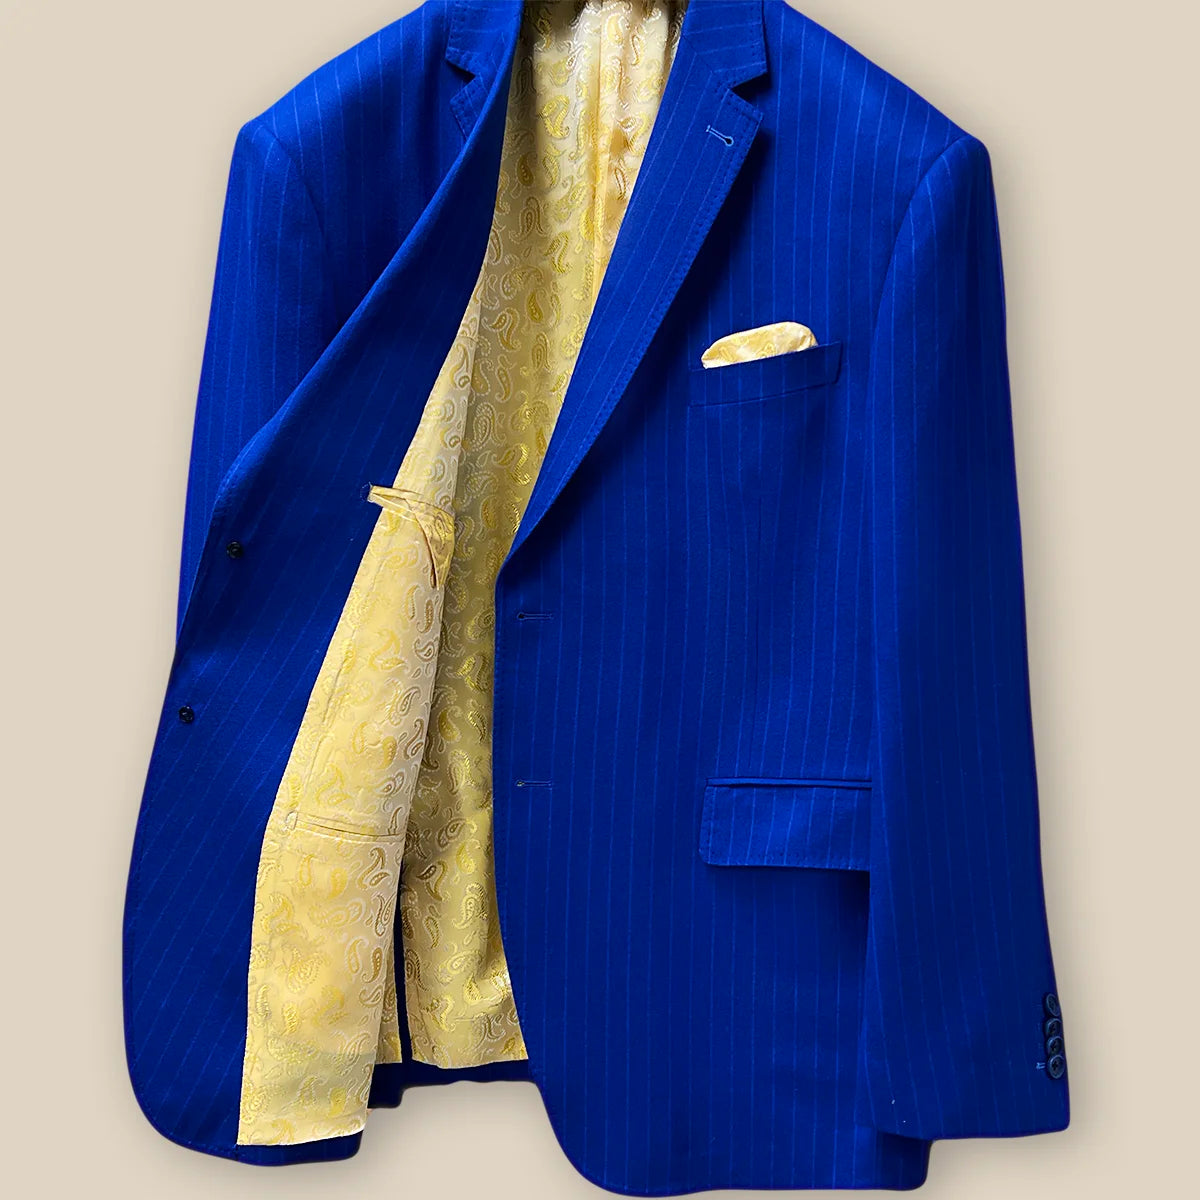 Inside right view of the royal blue pinstripe jacket.